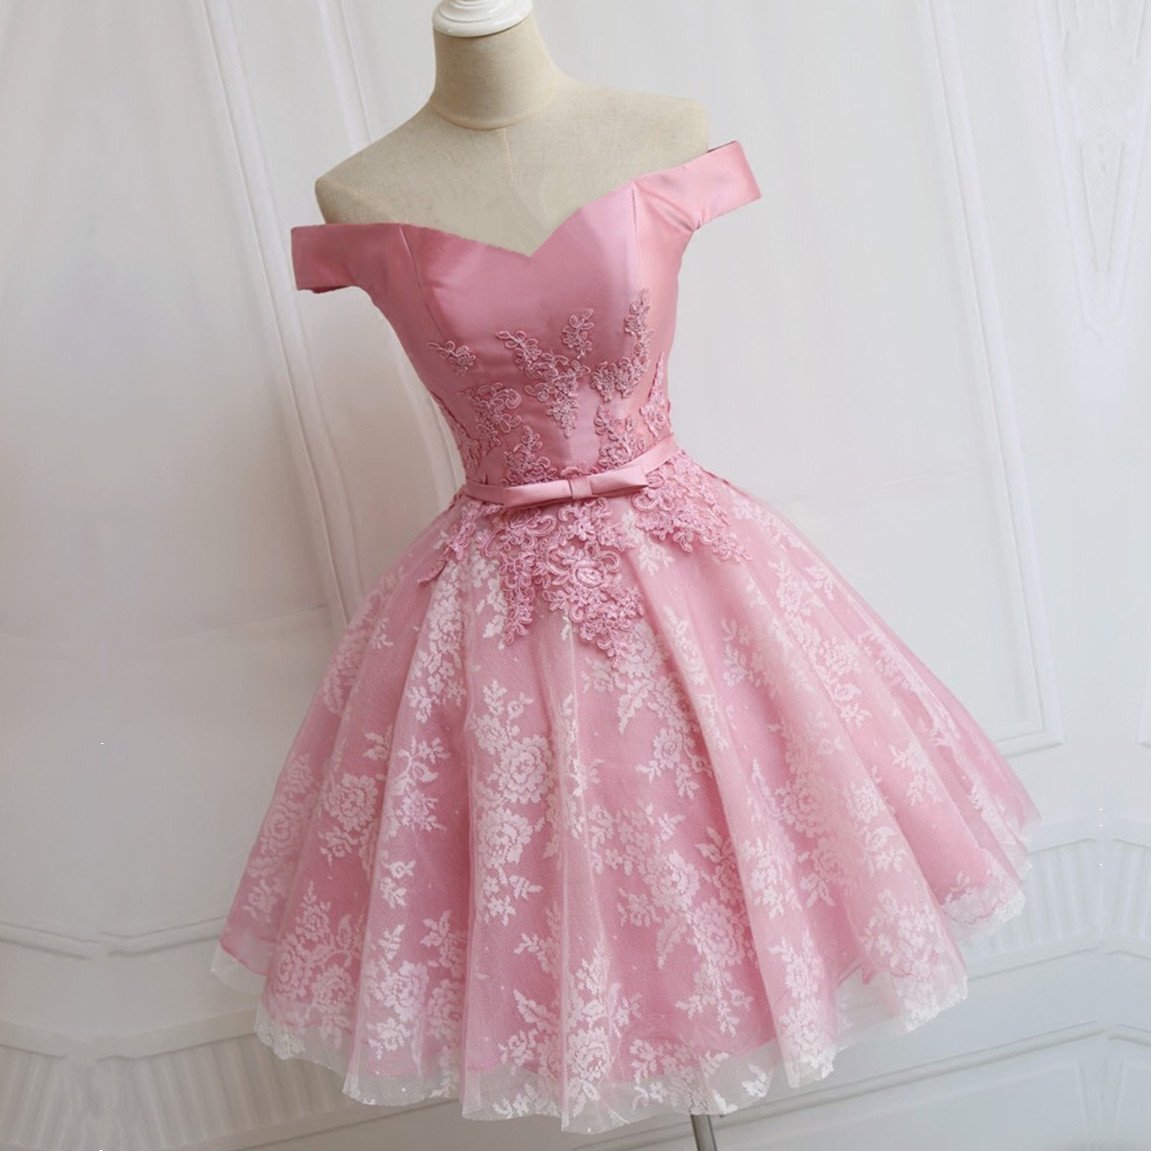 Custom Made A-line/princess Party Prom Dresses Short Pink Dresses With Lace Up Bowknot Mini Great Party Dresses